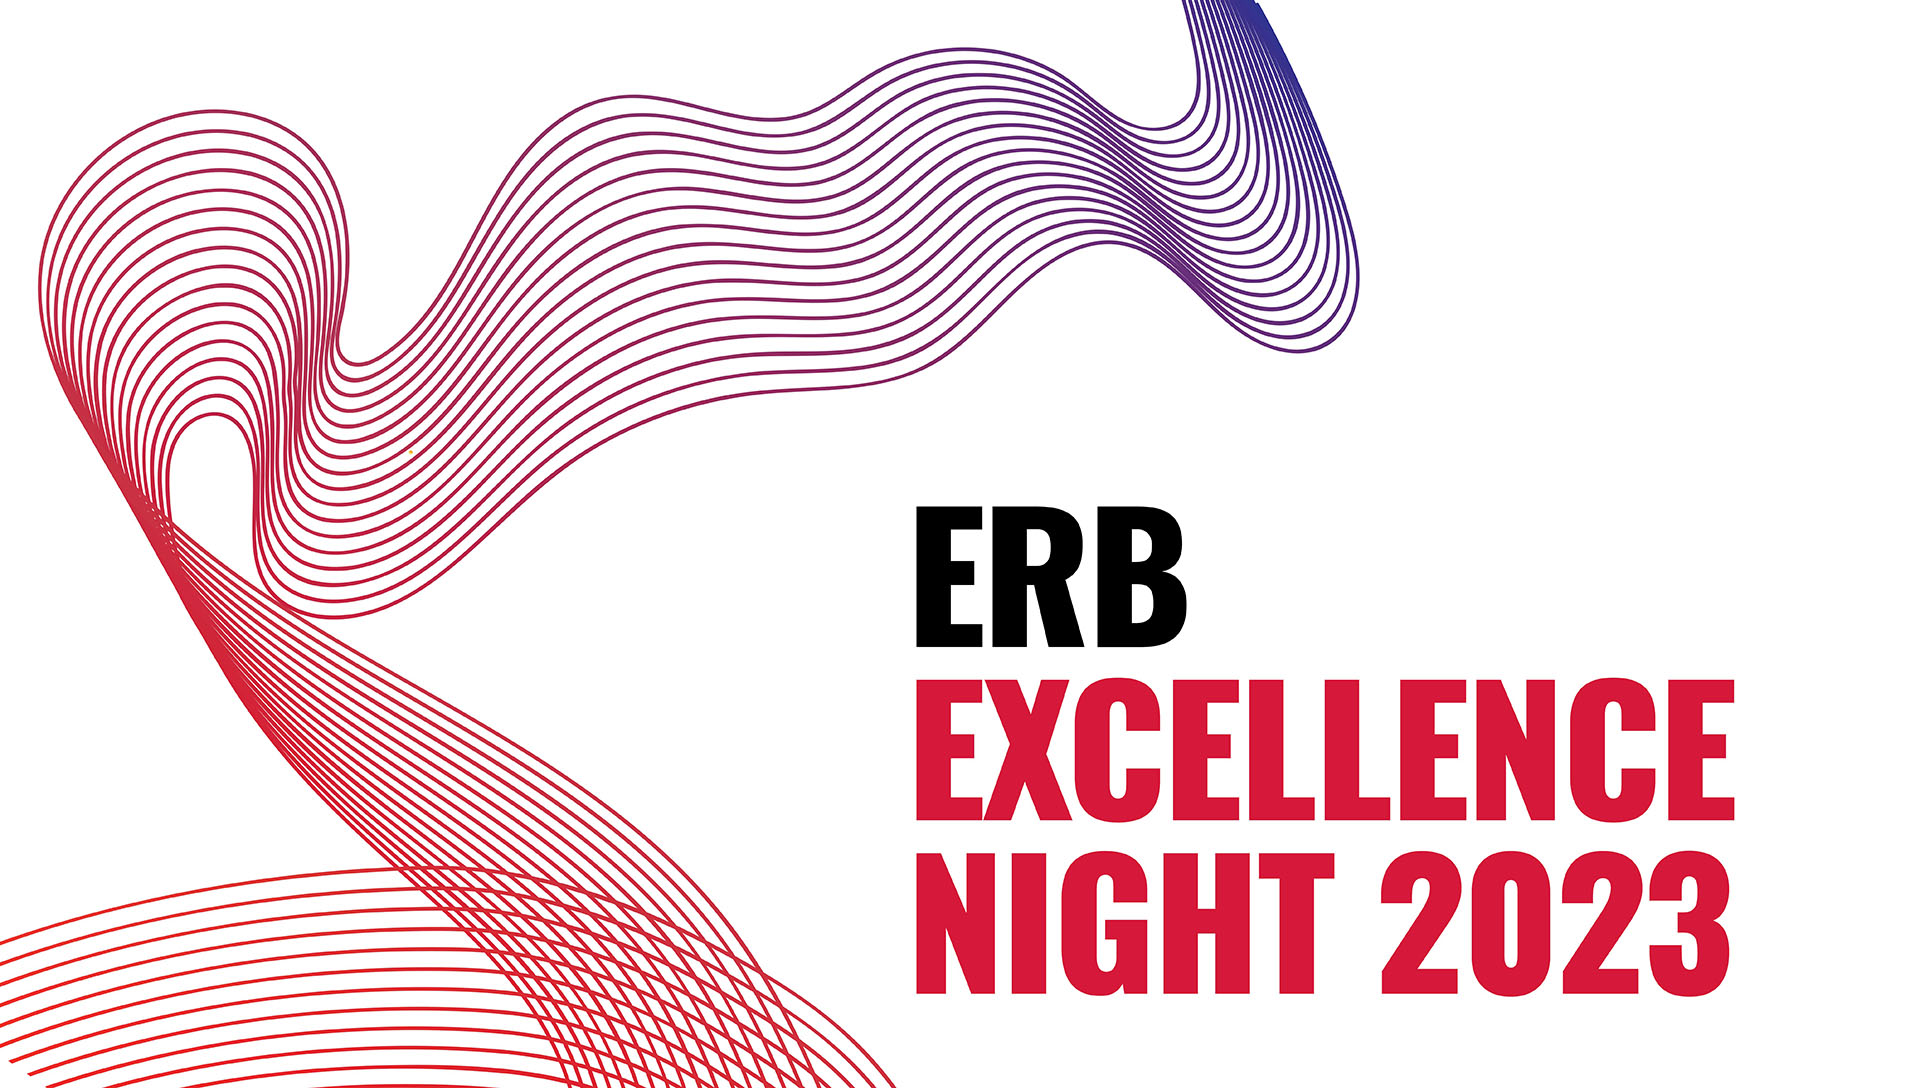 A Night to Remember: Erb Excellence Night 2023